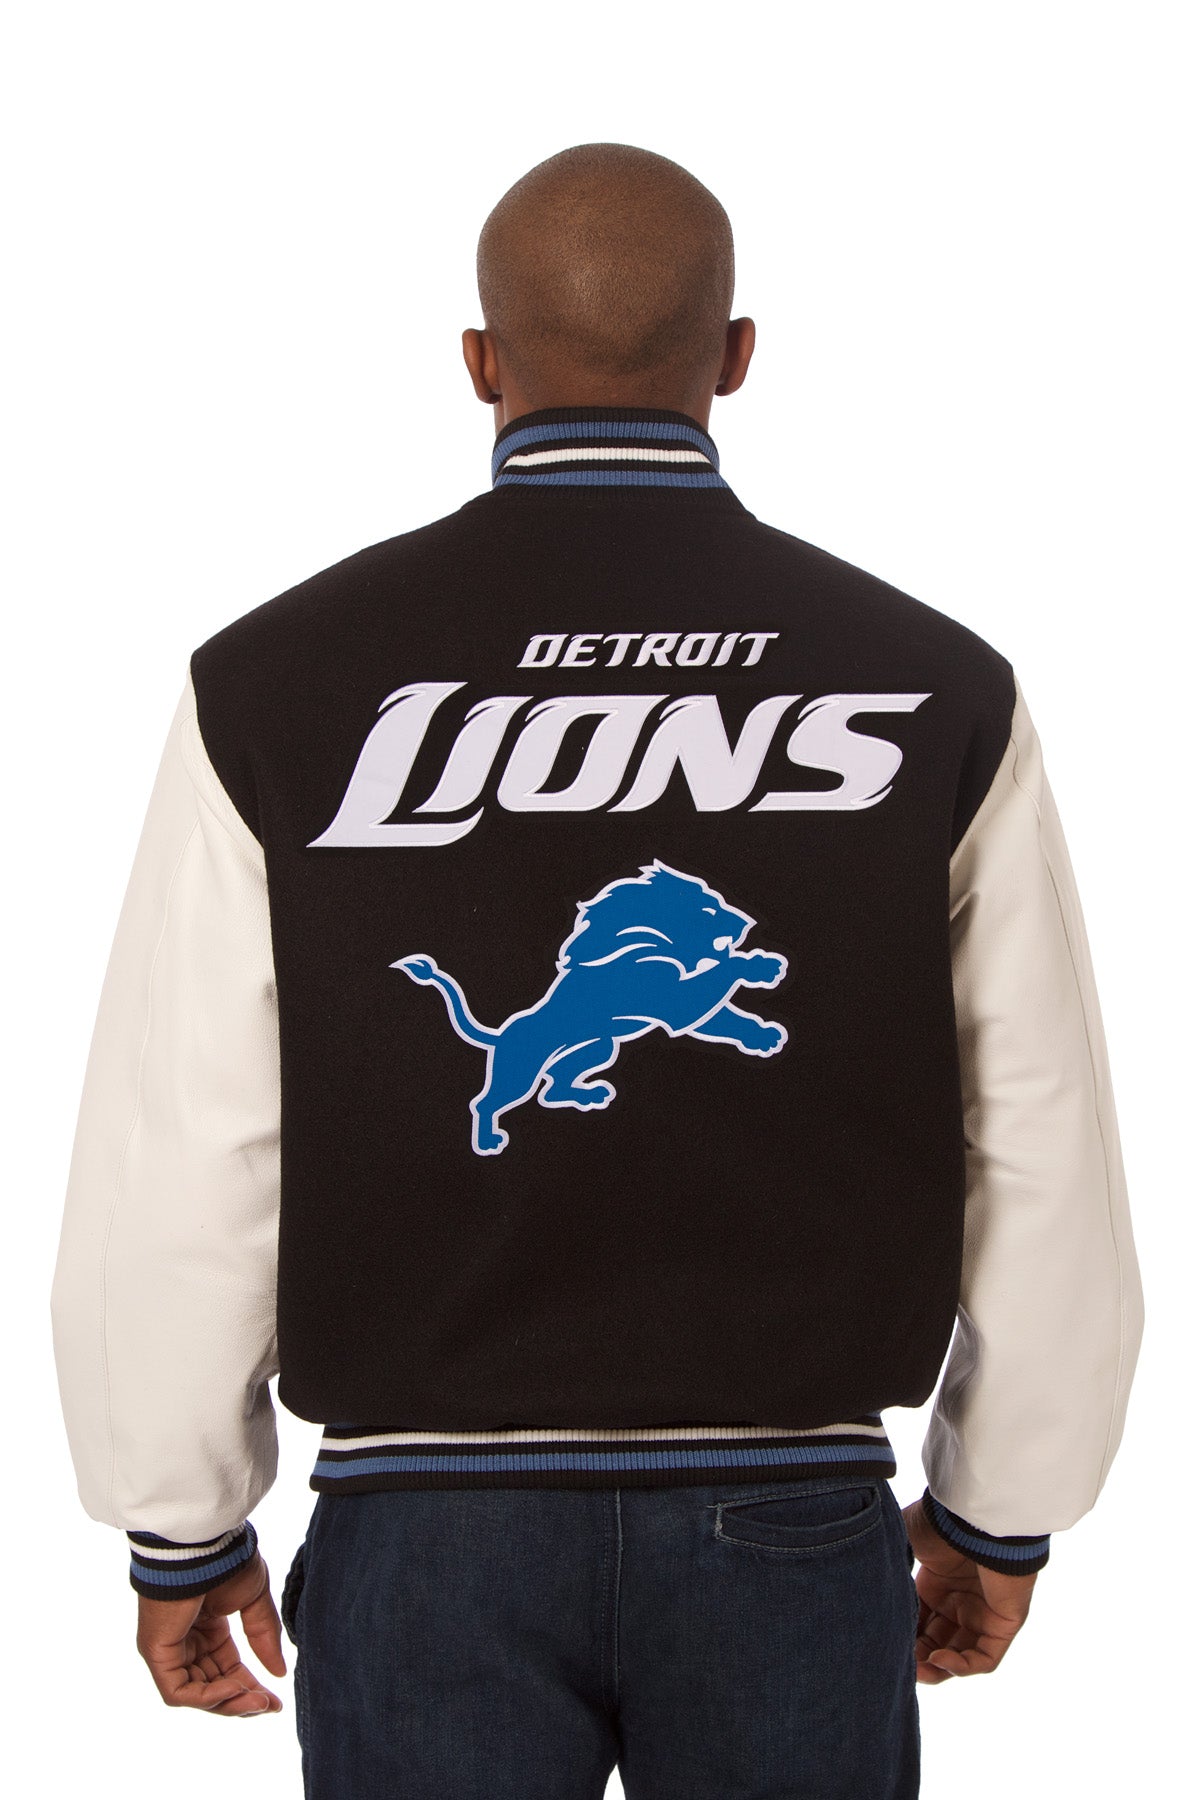 Detroit Lions Jets Two-Tone Wool and Leather Jacket - Black/White | J.H ...